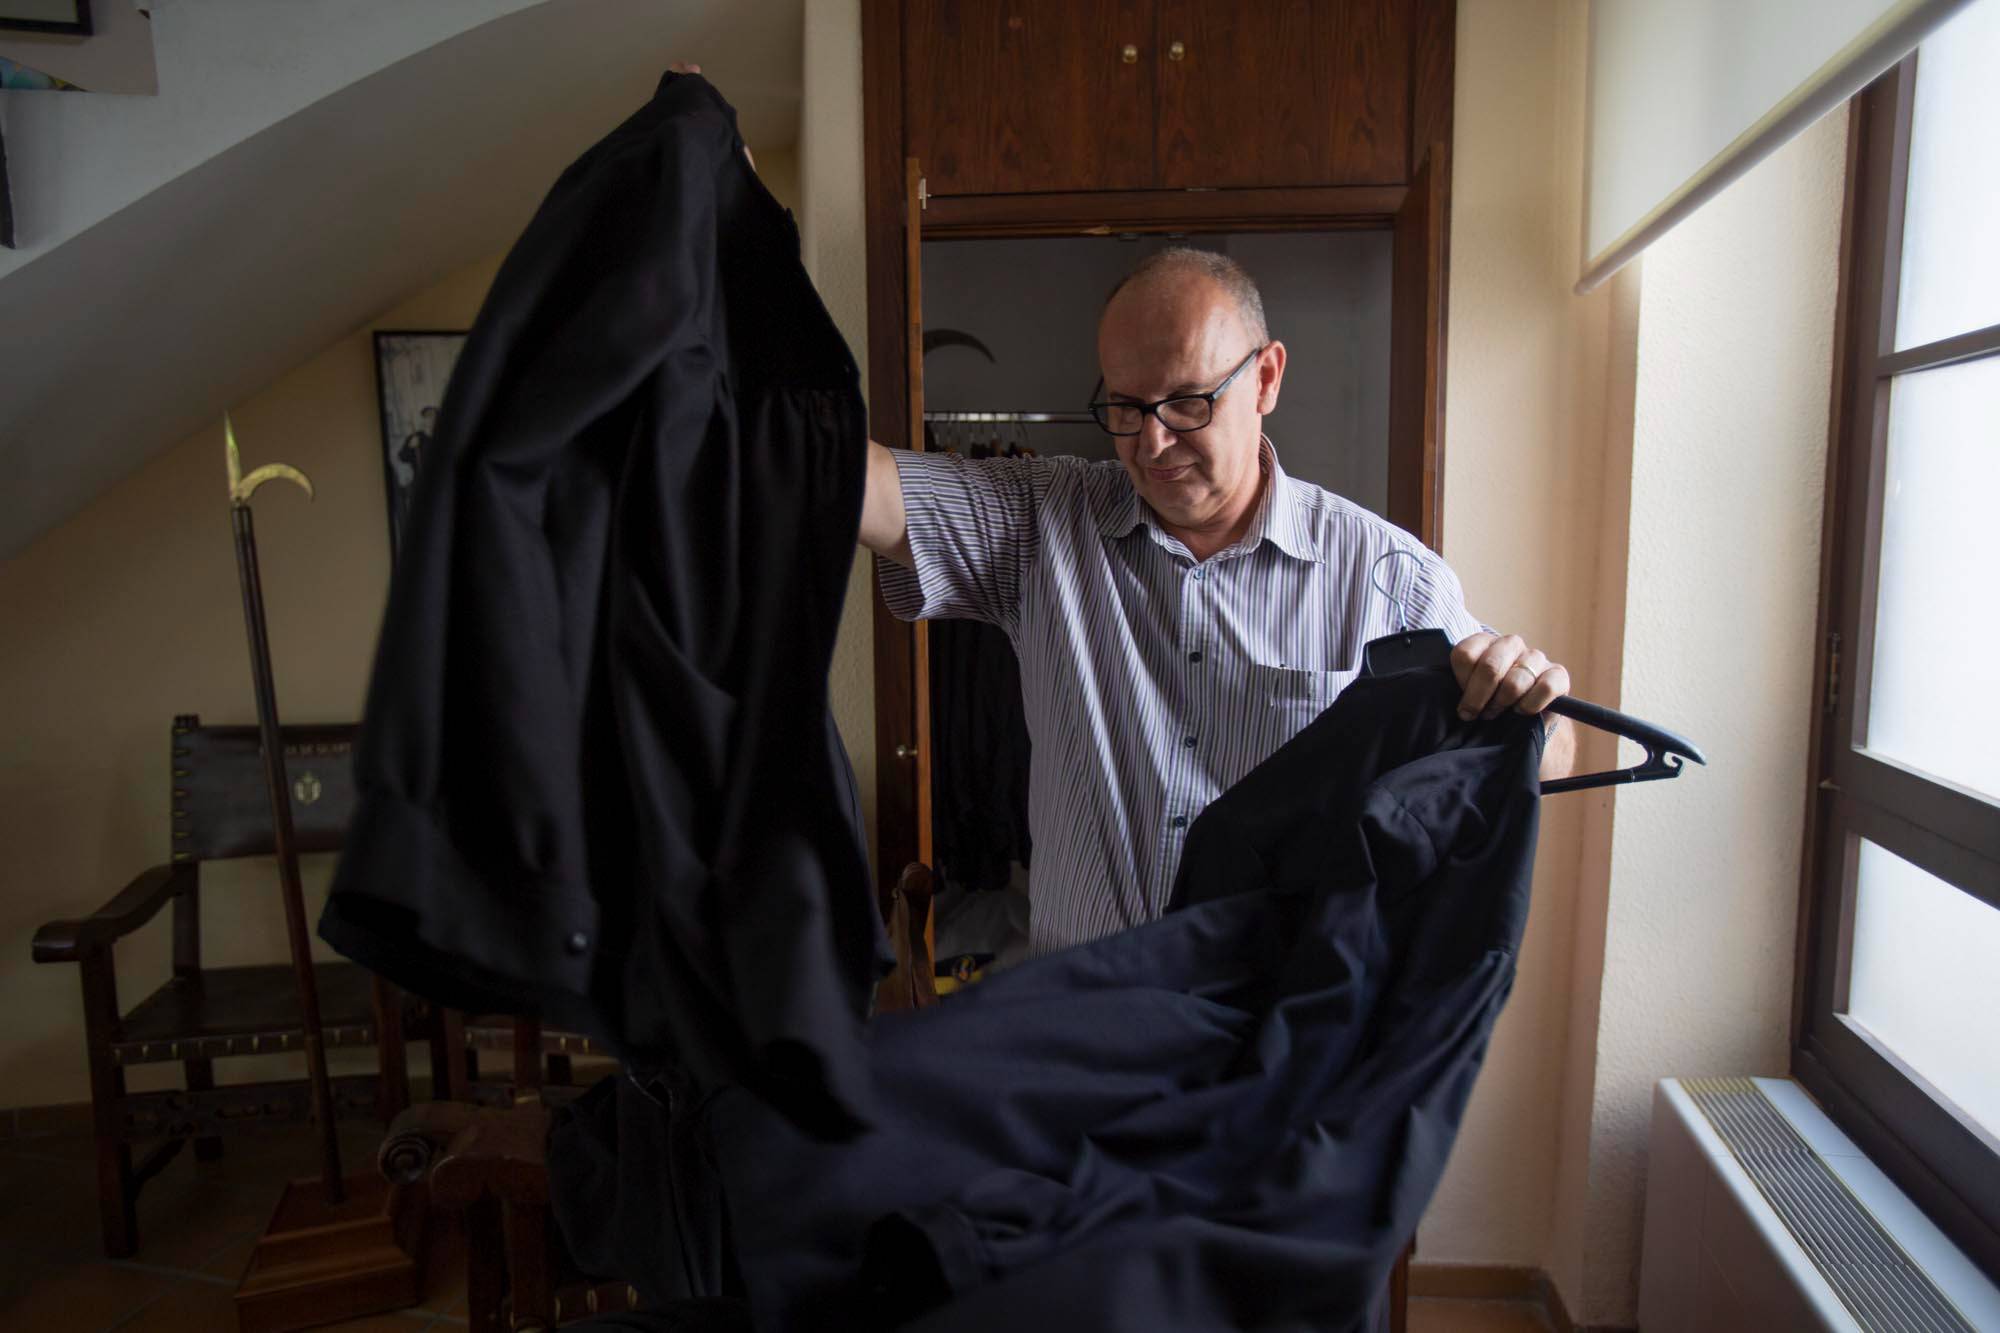 Man holding up black robes in a bedroom